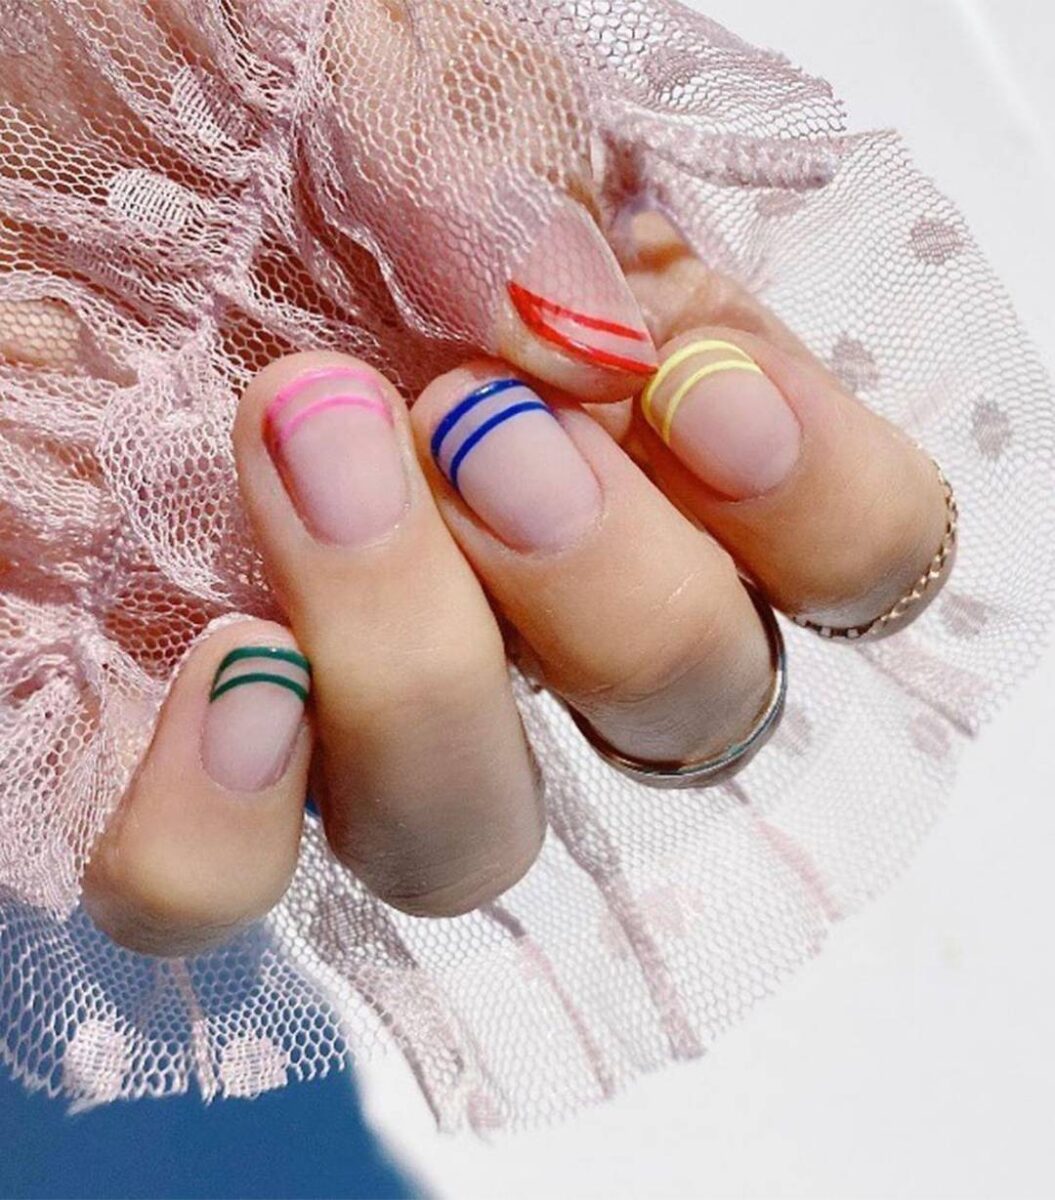 Nails with two thin lines of a different color at the top of each nail